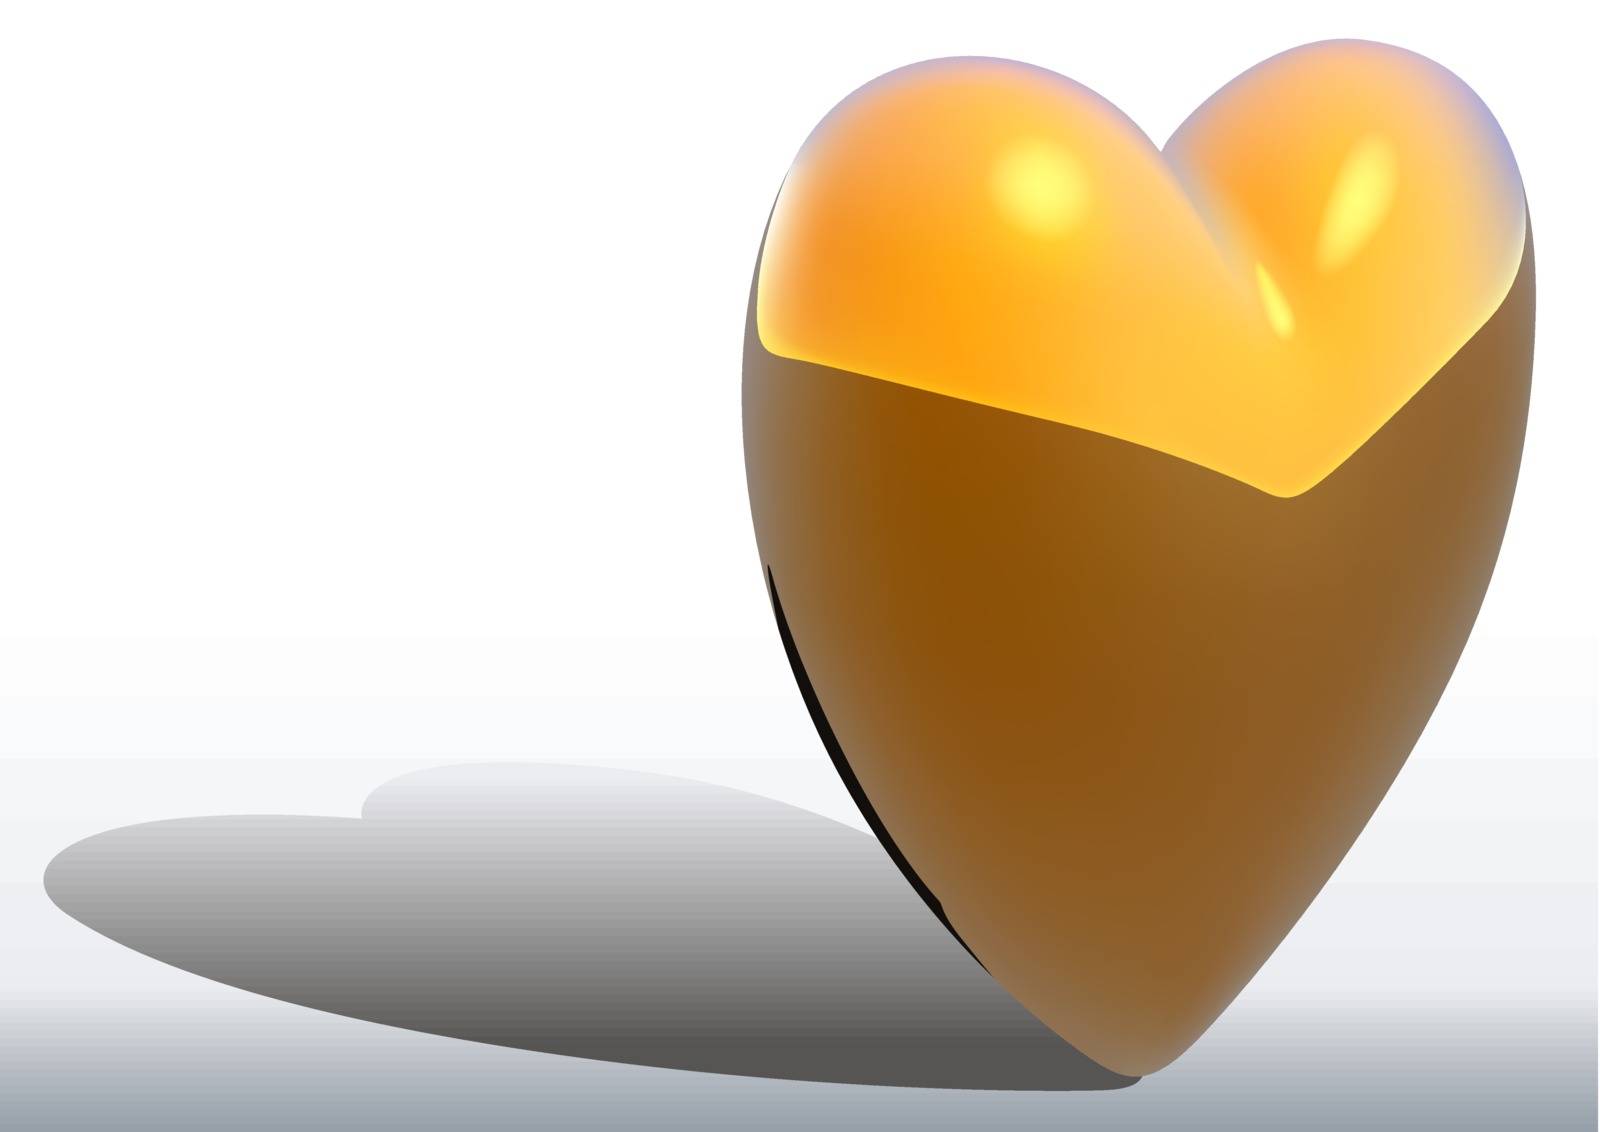 Gold Heart - Colored Illustration, Vector